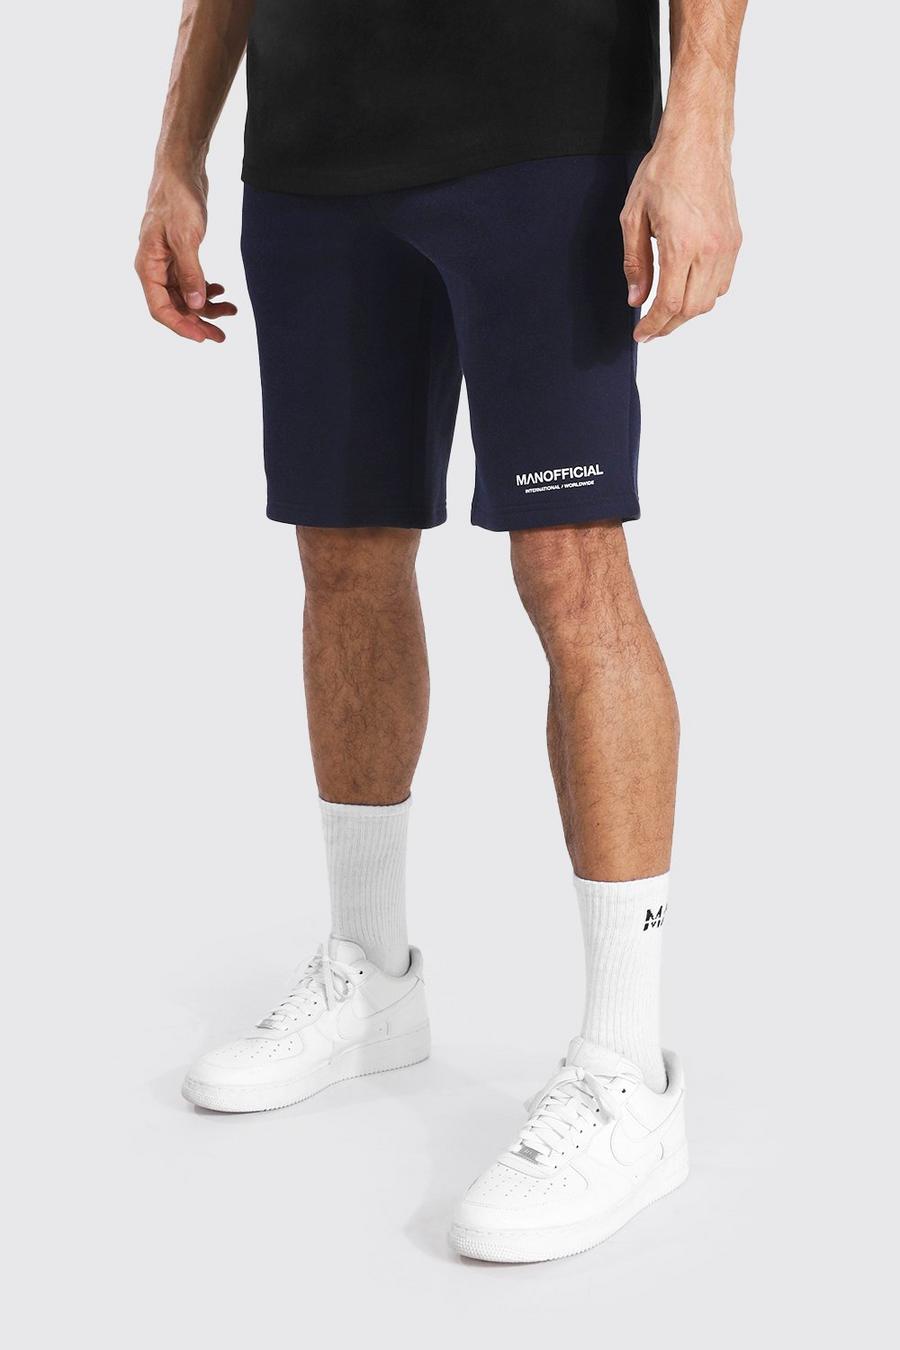 Navy Tall Man Official Middellange Jersey Shorts Met Taille Band Detail image number 1